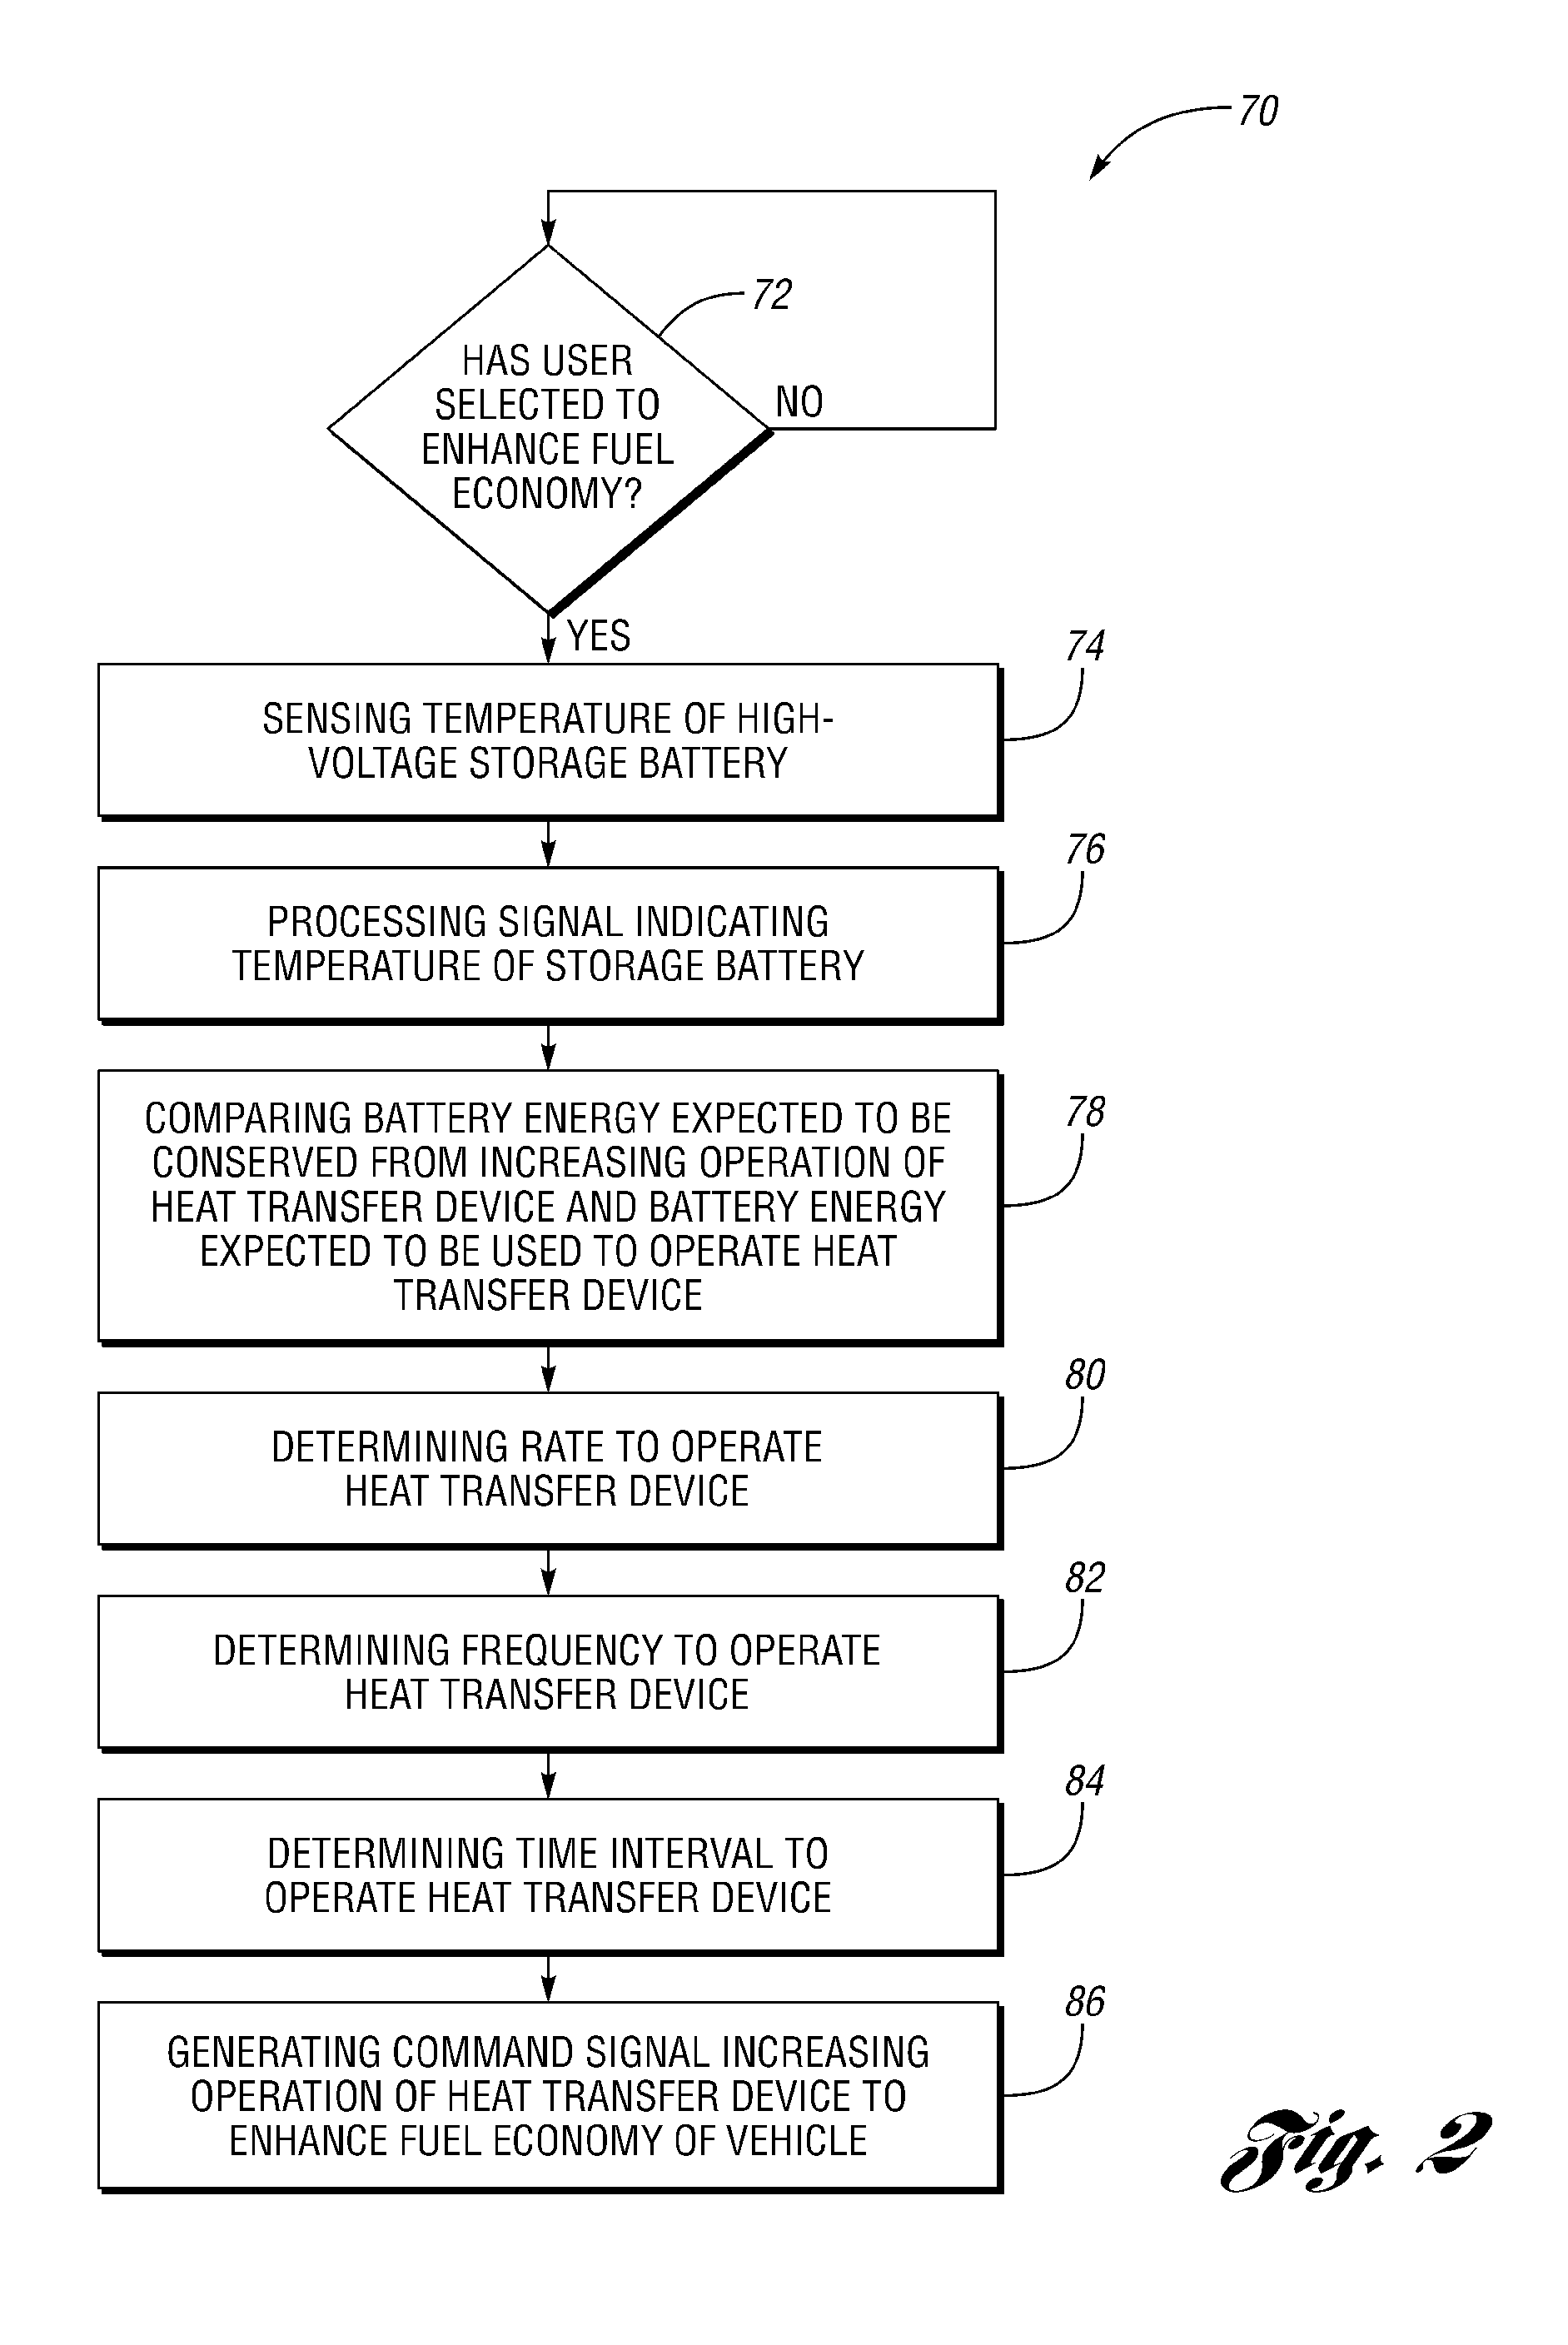 Method And System For Enhancing Fuel Economy Of A Hybrid Electric Vehicle